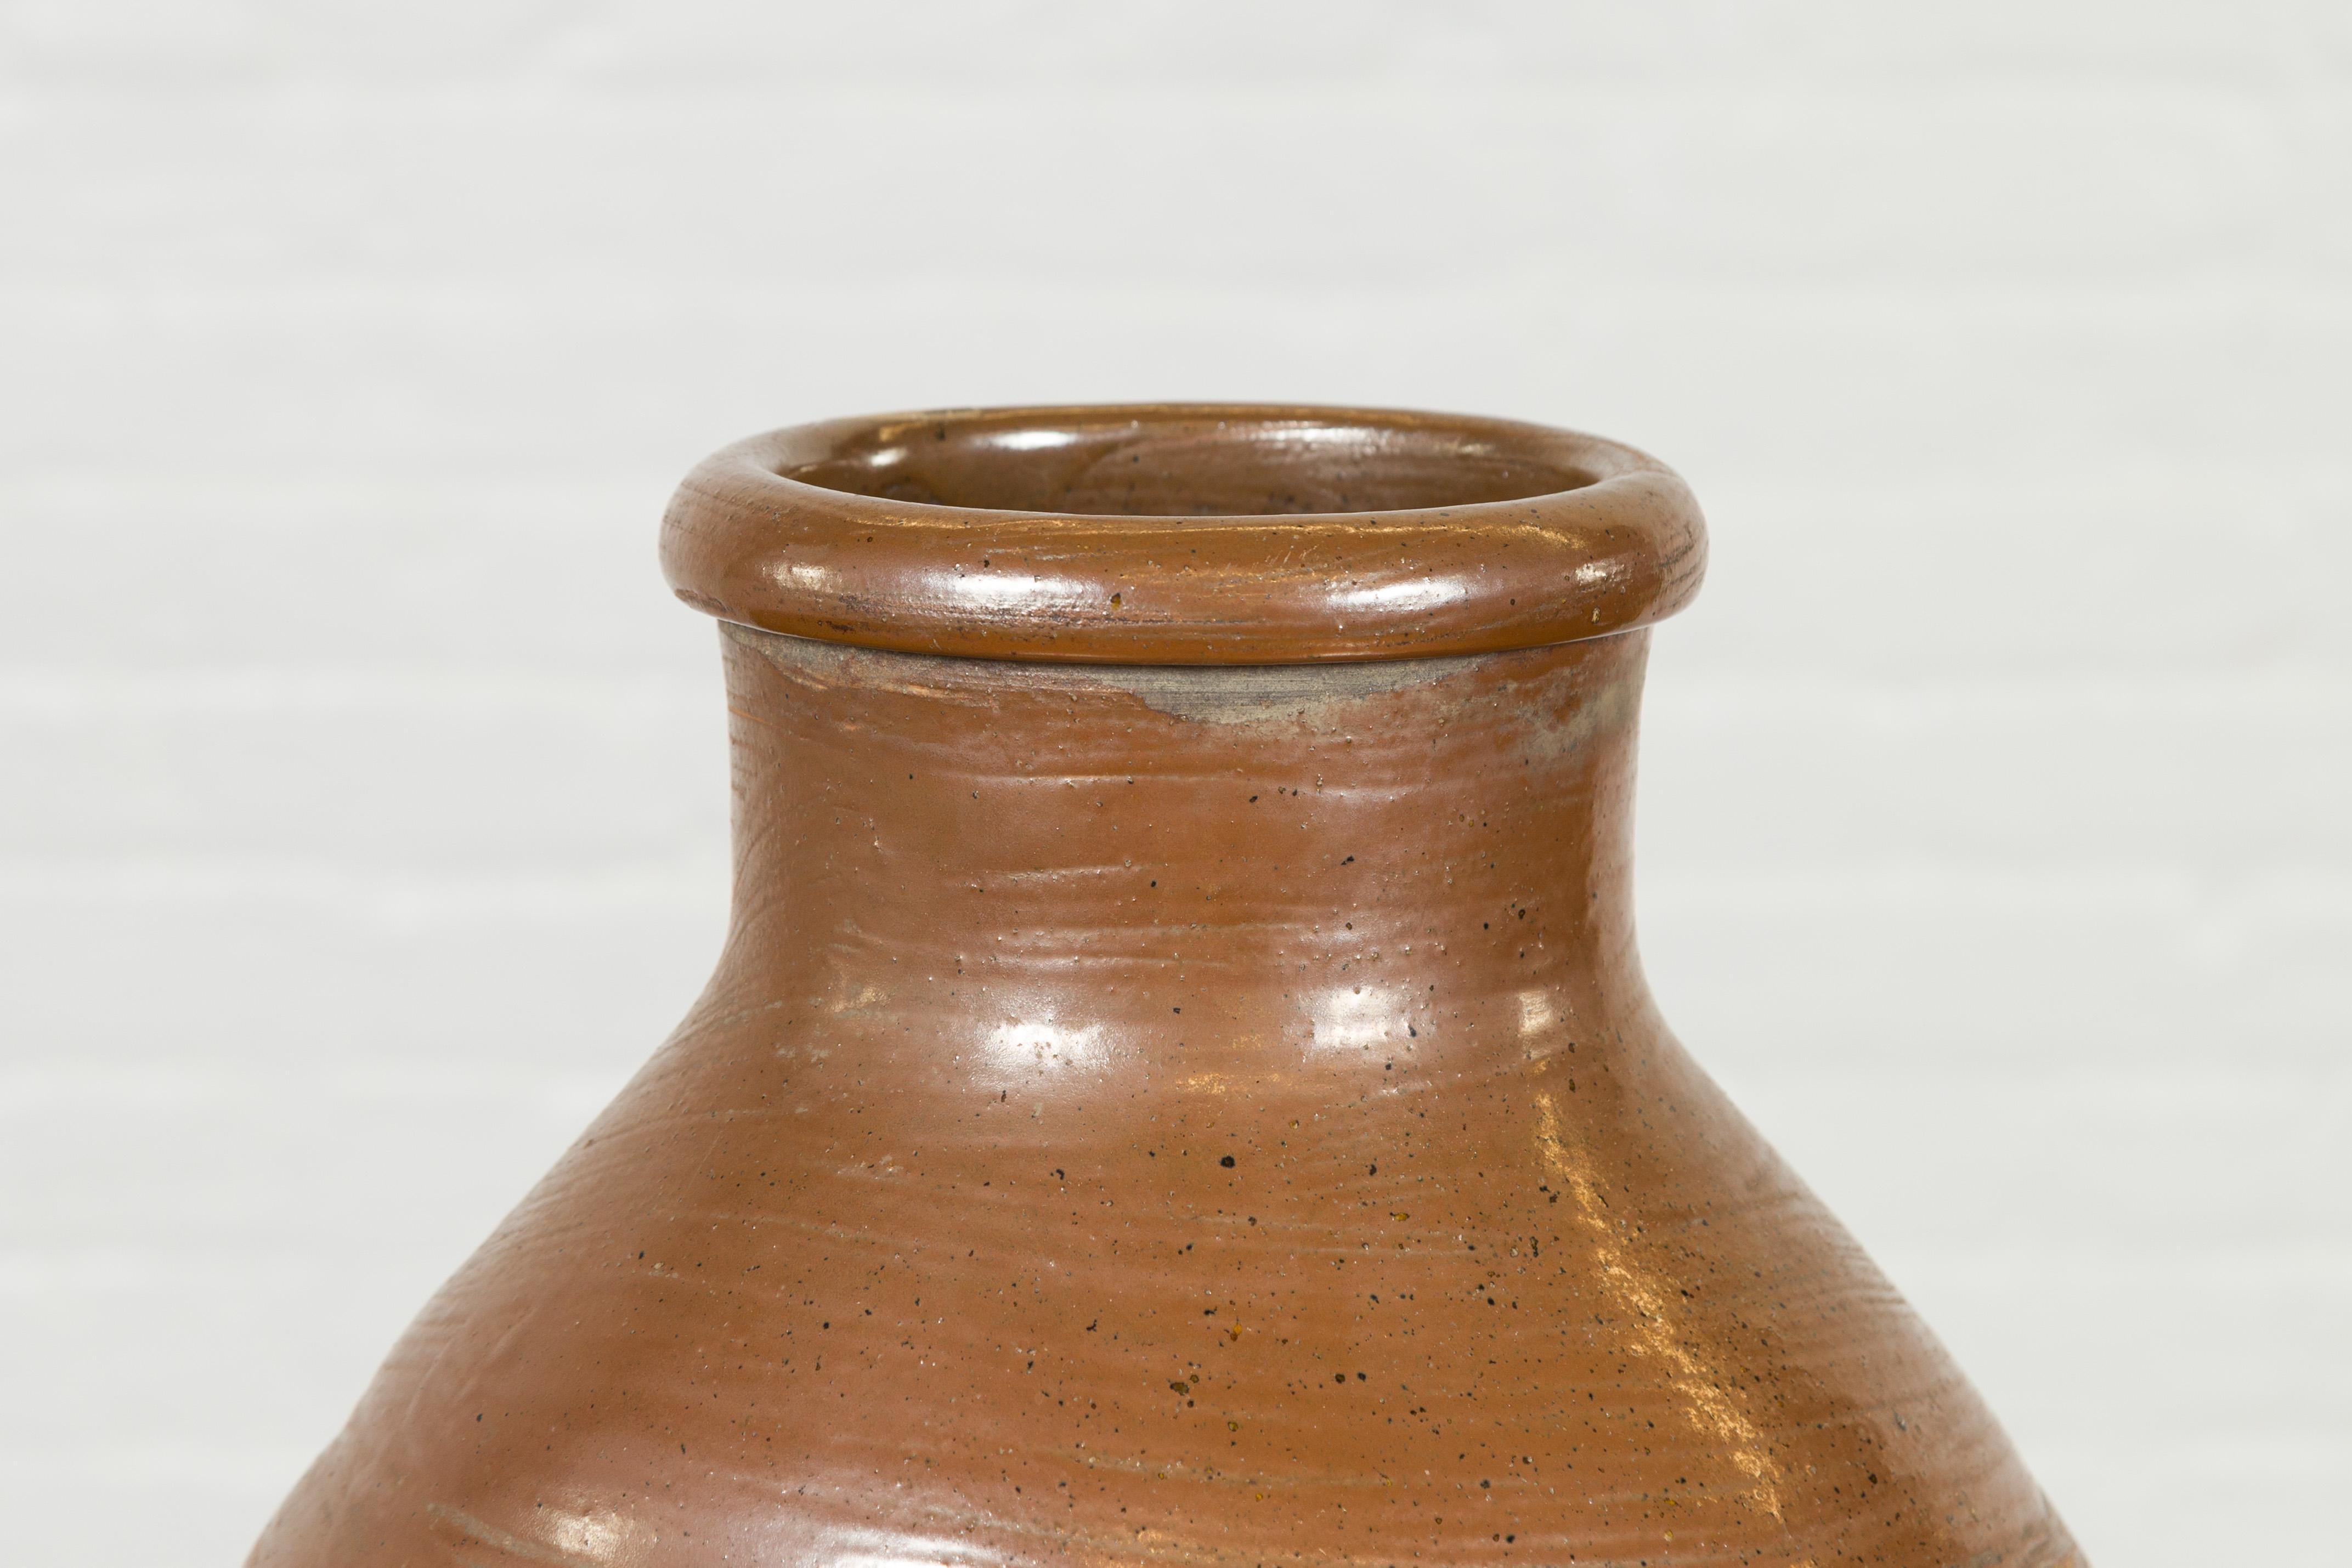 Japanese Meiji Period 19th century Water Jar with Brown Monochrome Patina For Sale 1